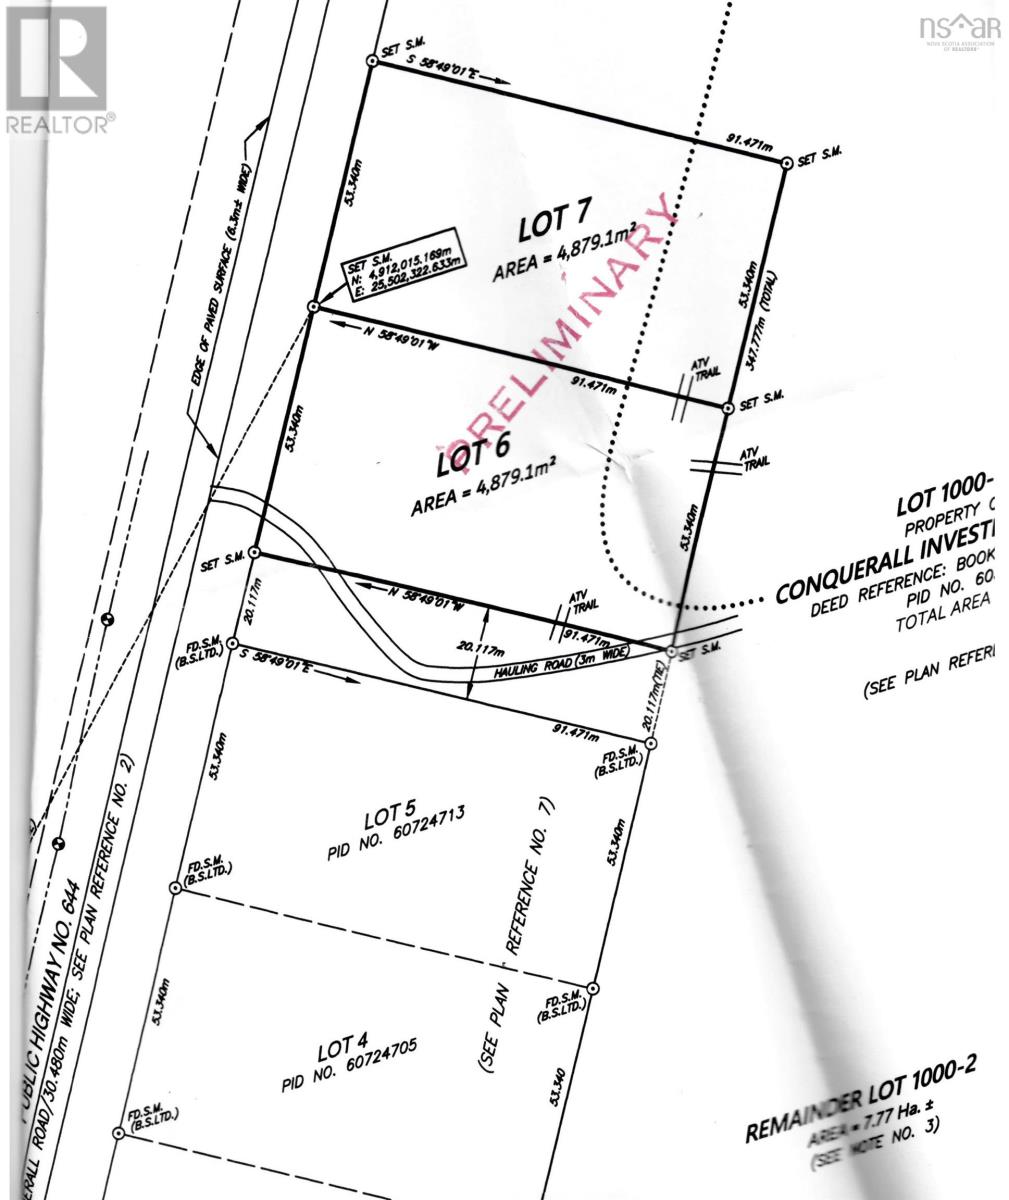 Vacant Land For Sale | Lot 7 Conquerall Road | Conquerall Bank | B4V2W3